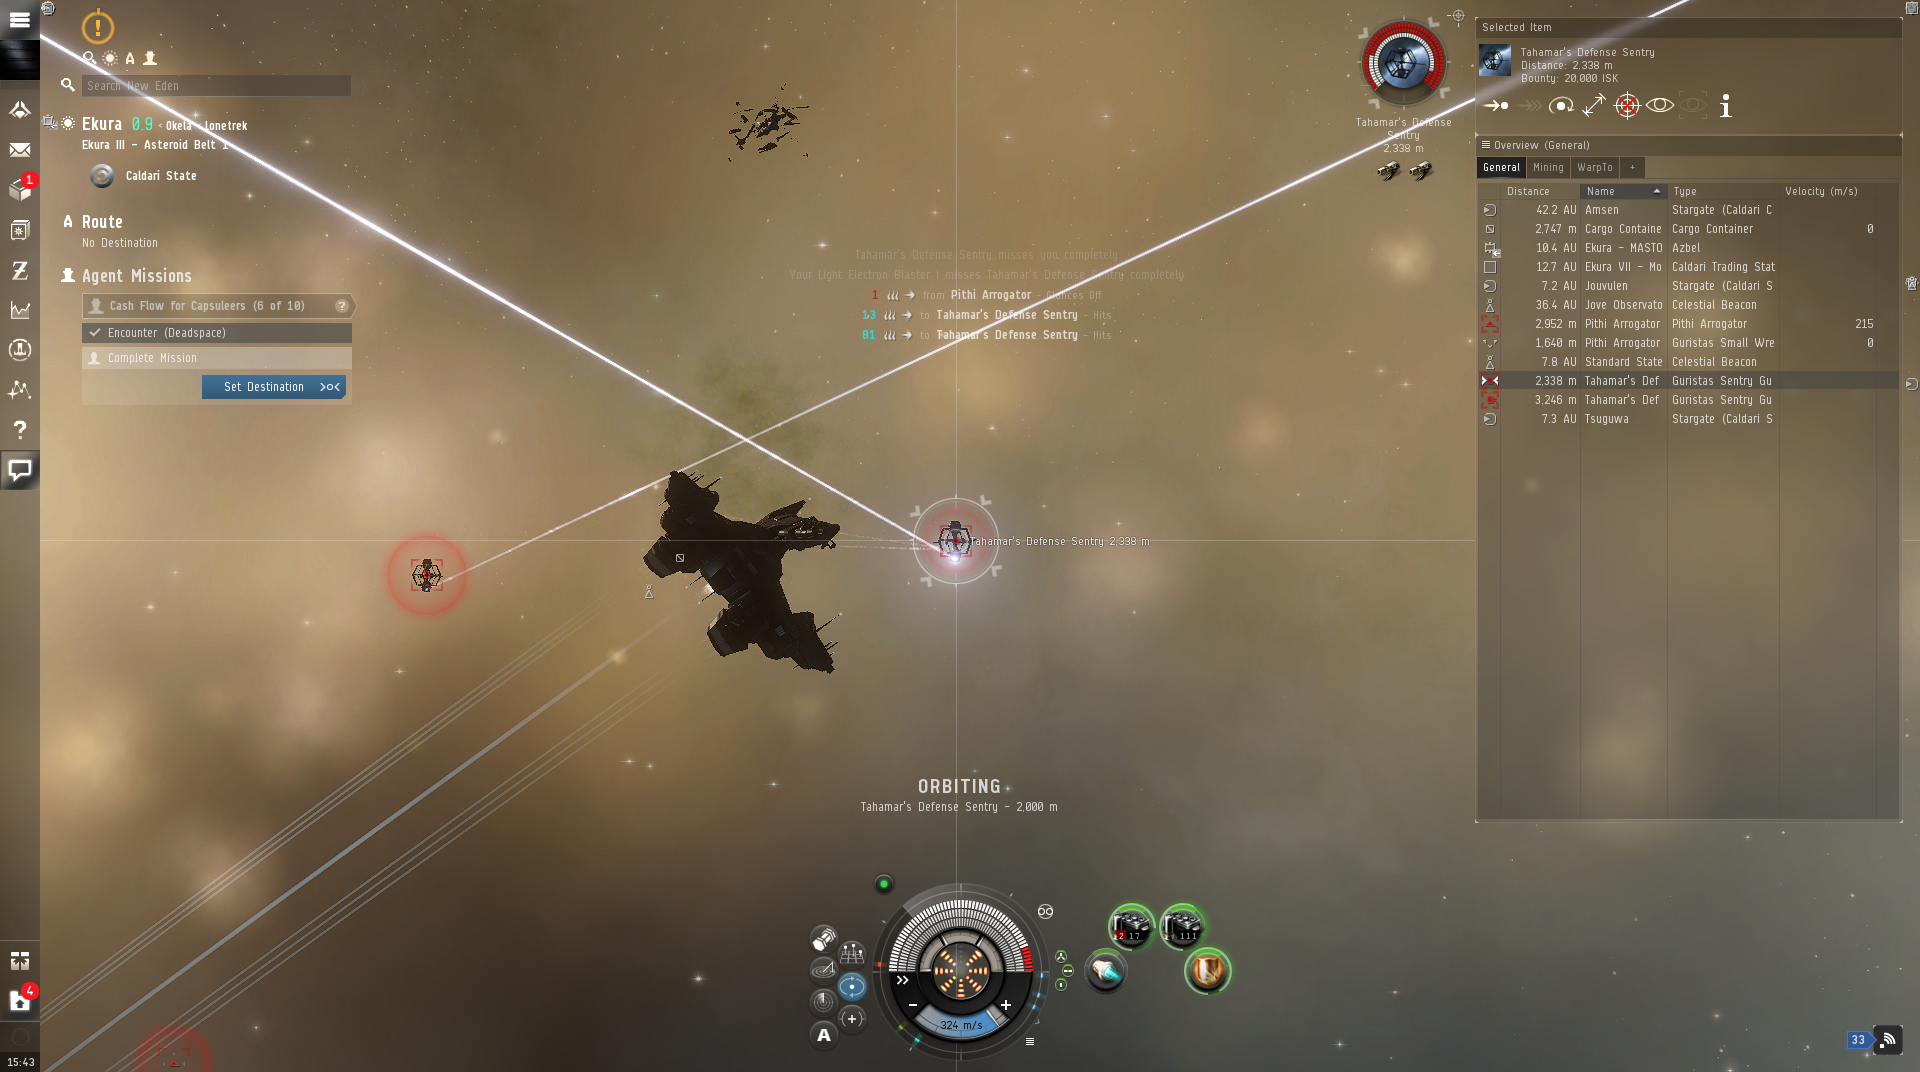 Choose My Adventure: EVE Online wasn't really all that bad I guess